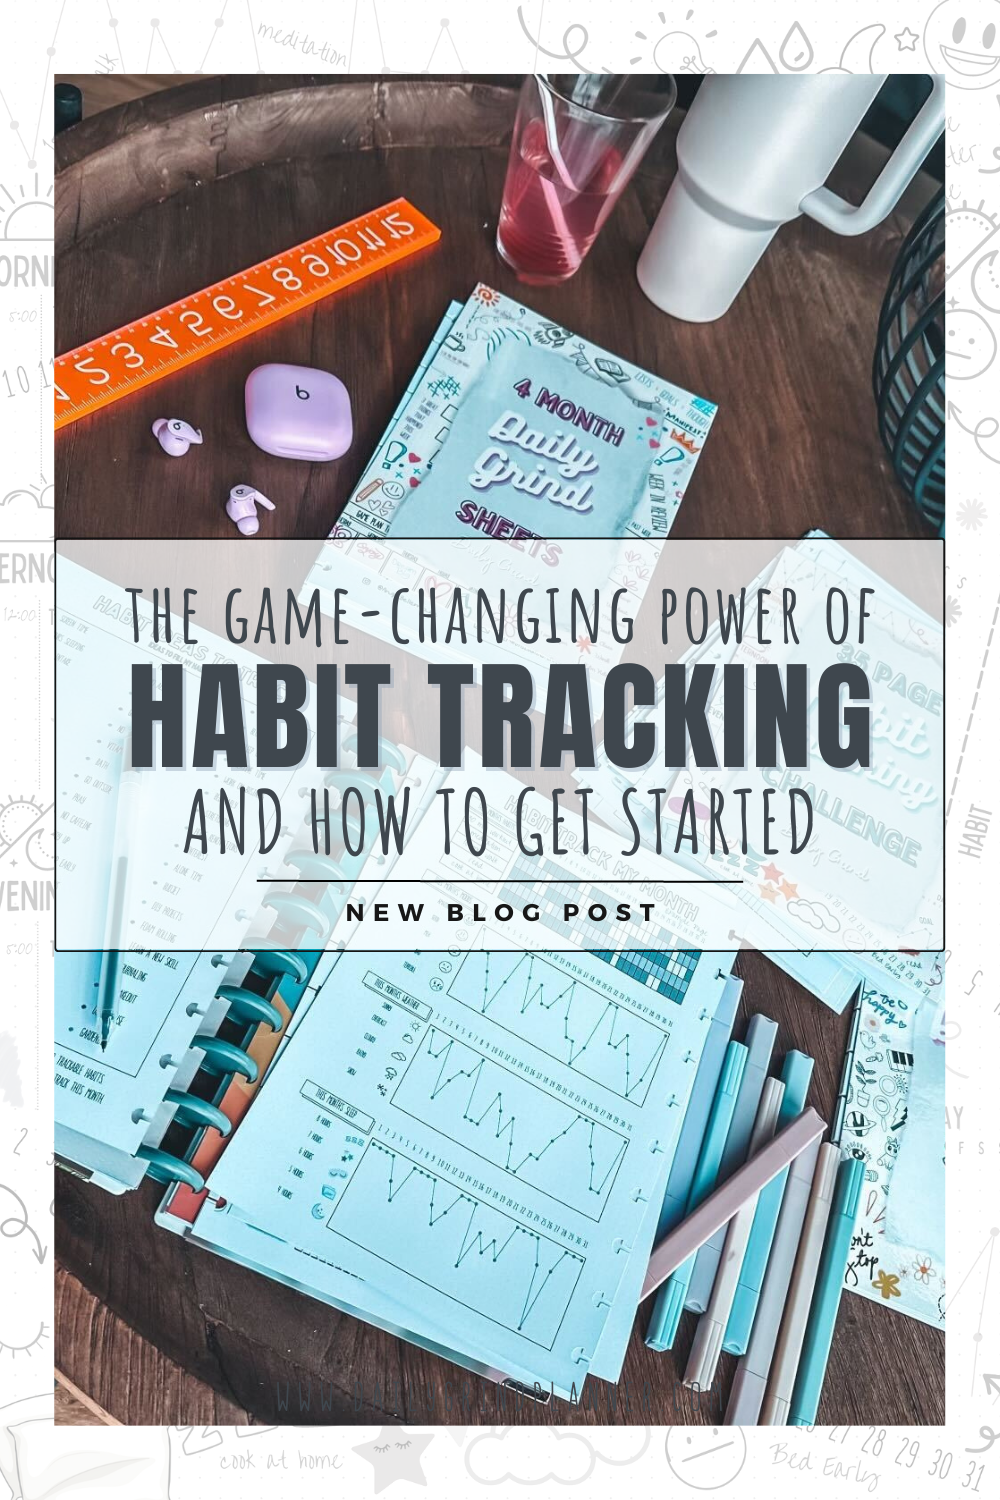 THE GAME-CHANGING POWER OF HABIT TRACKING & HOW TO GET STARTED